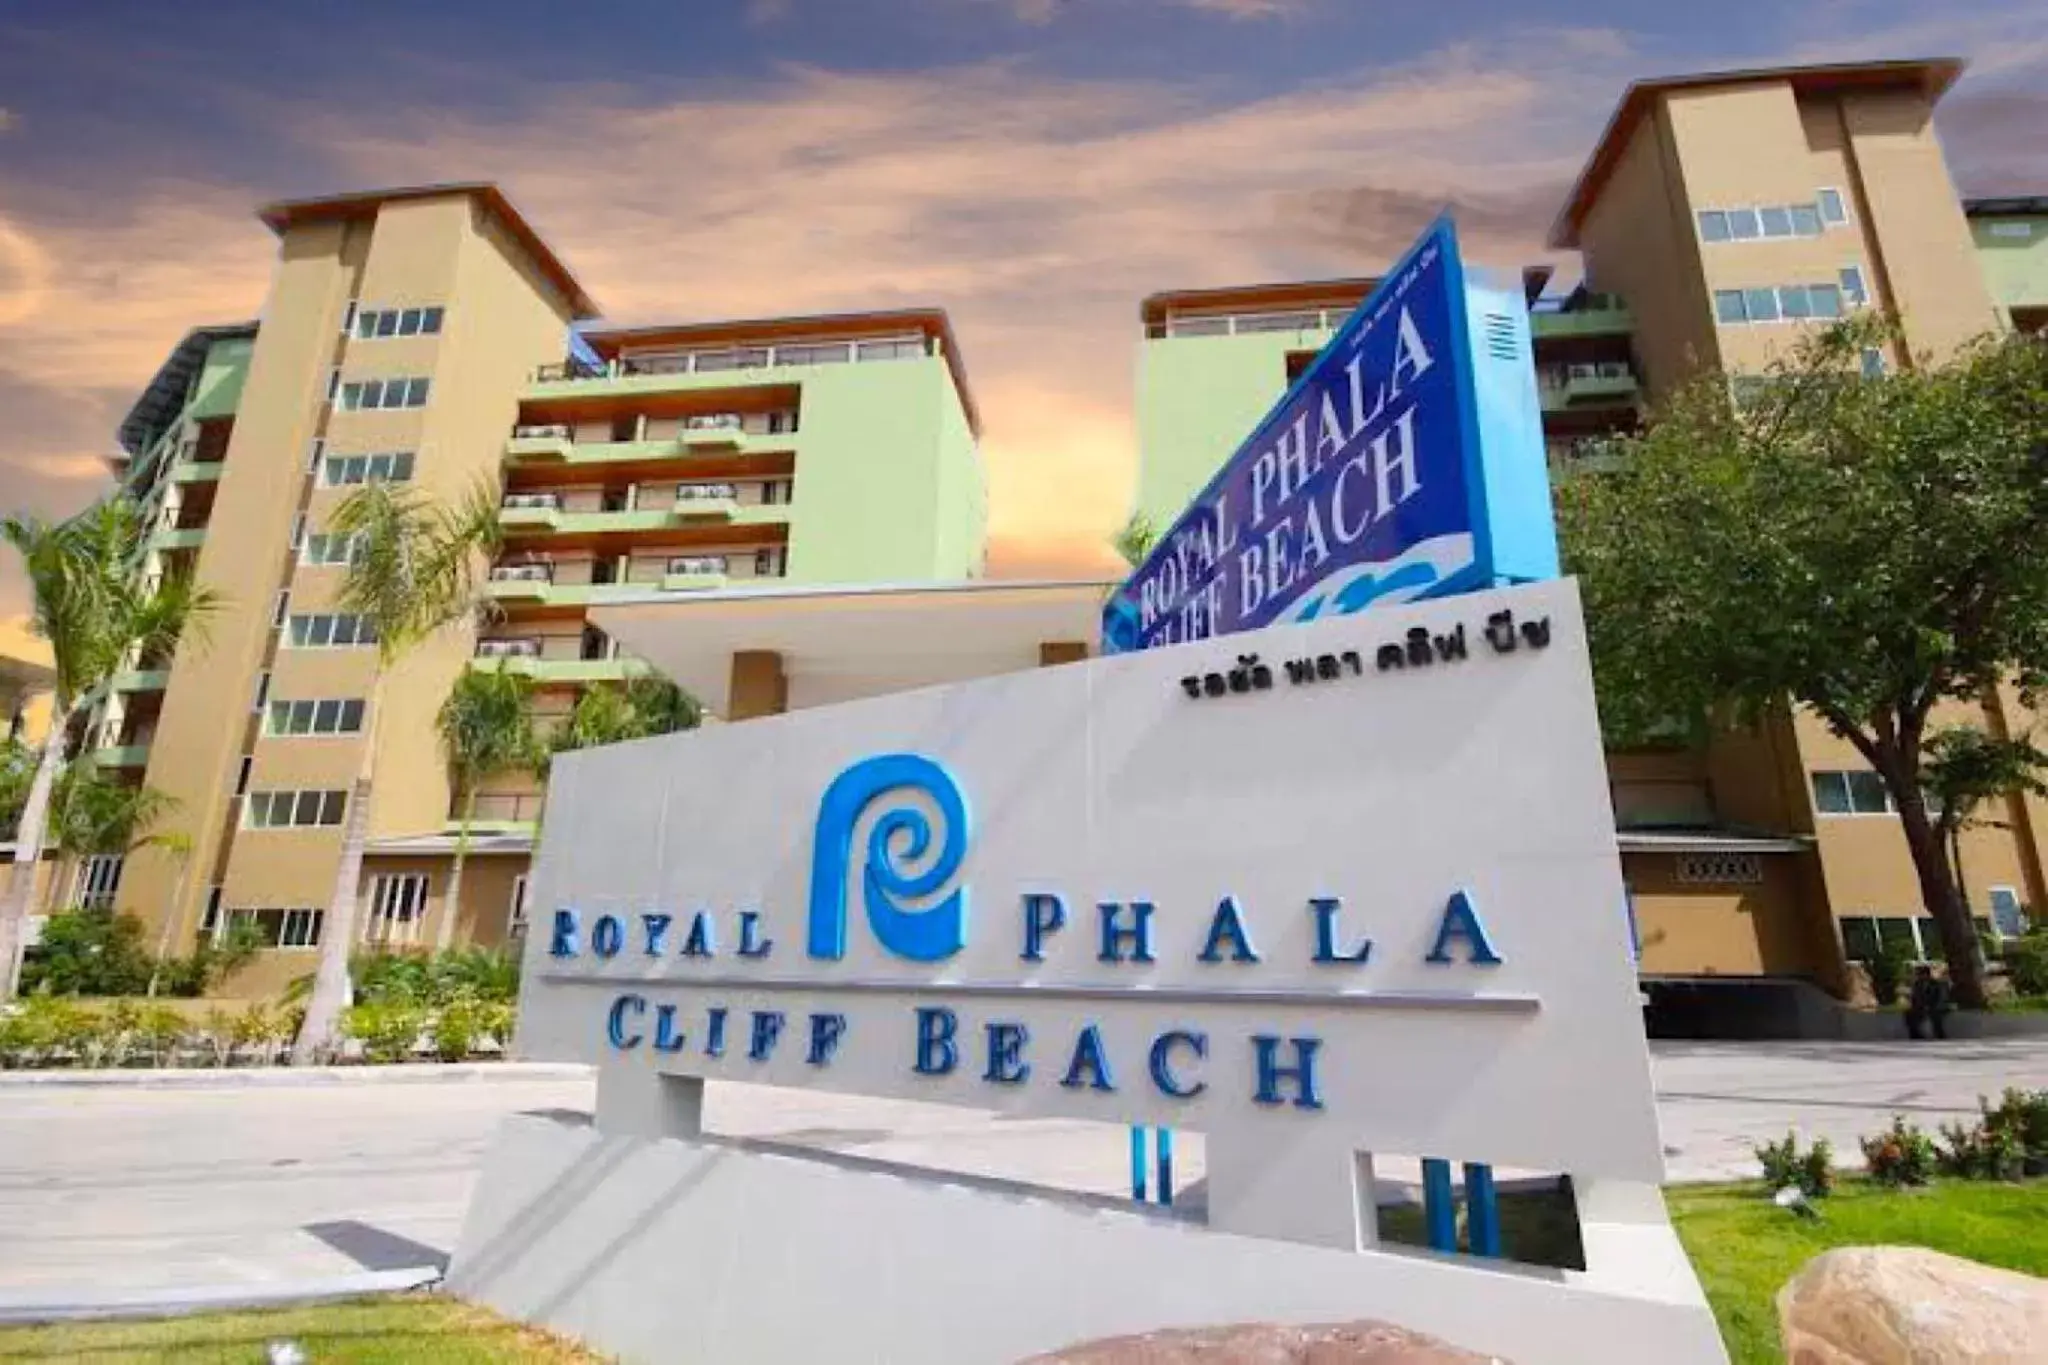 Property logo or sign, Property Building in Royal Phala Cliff Beach Resort